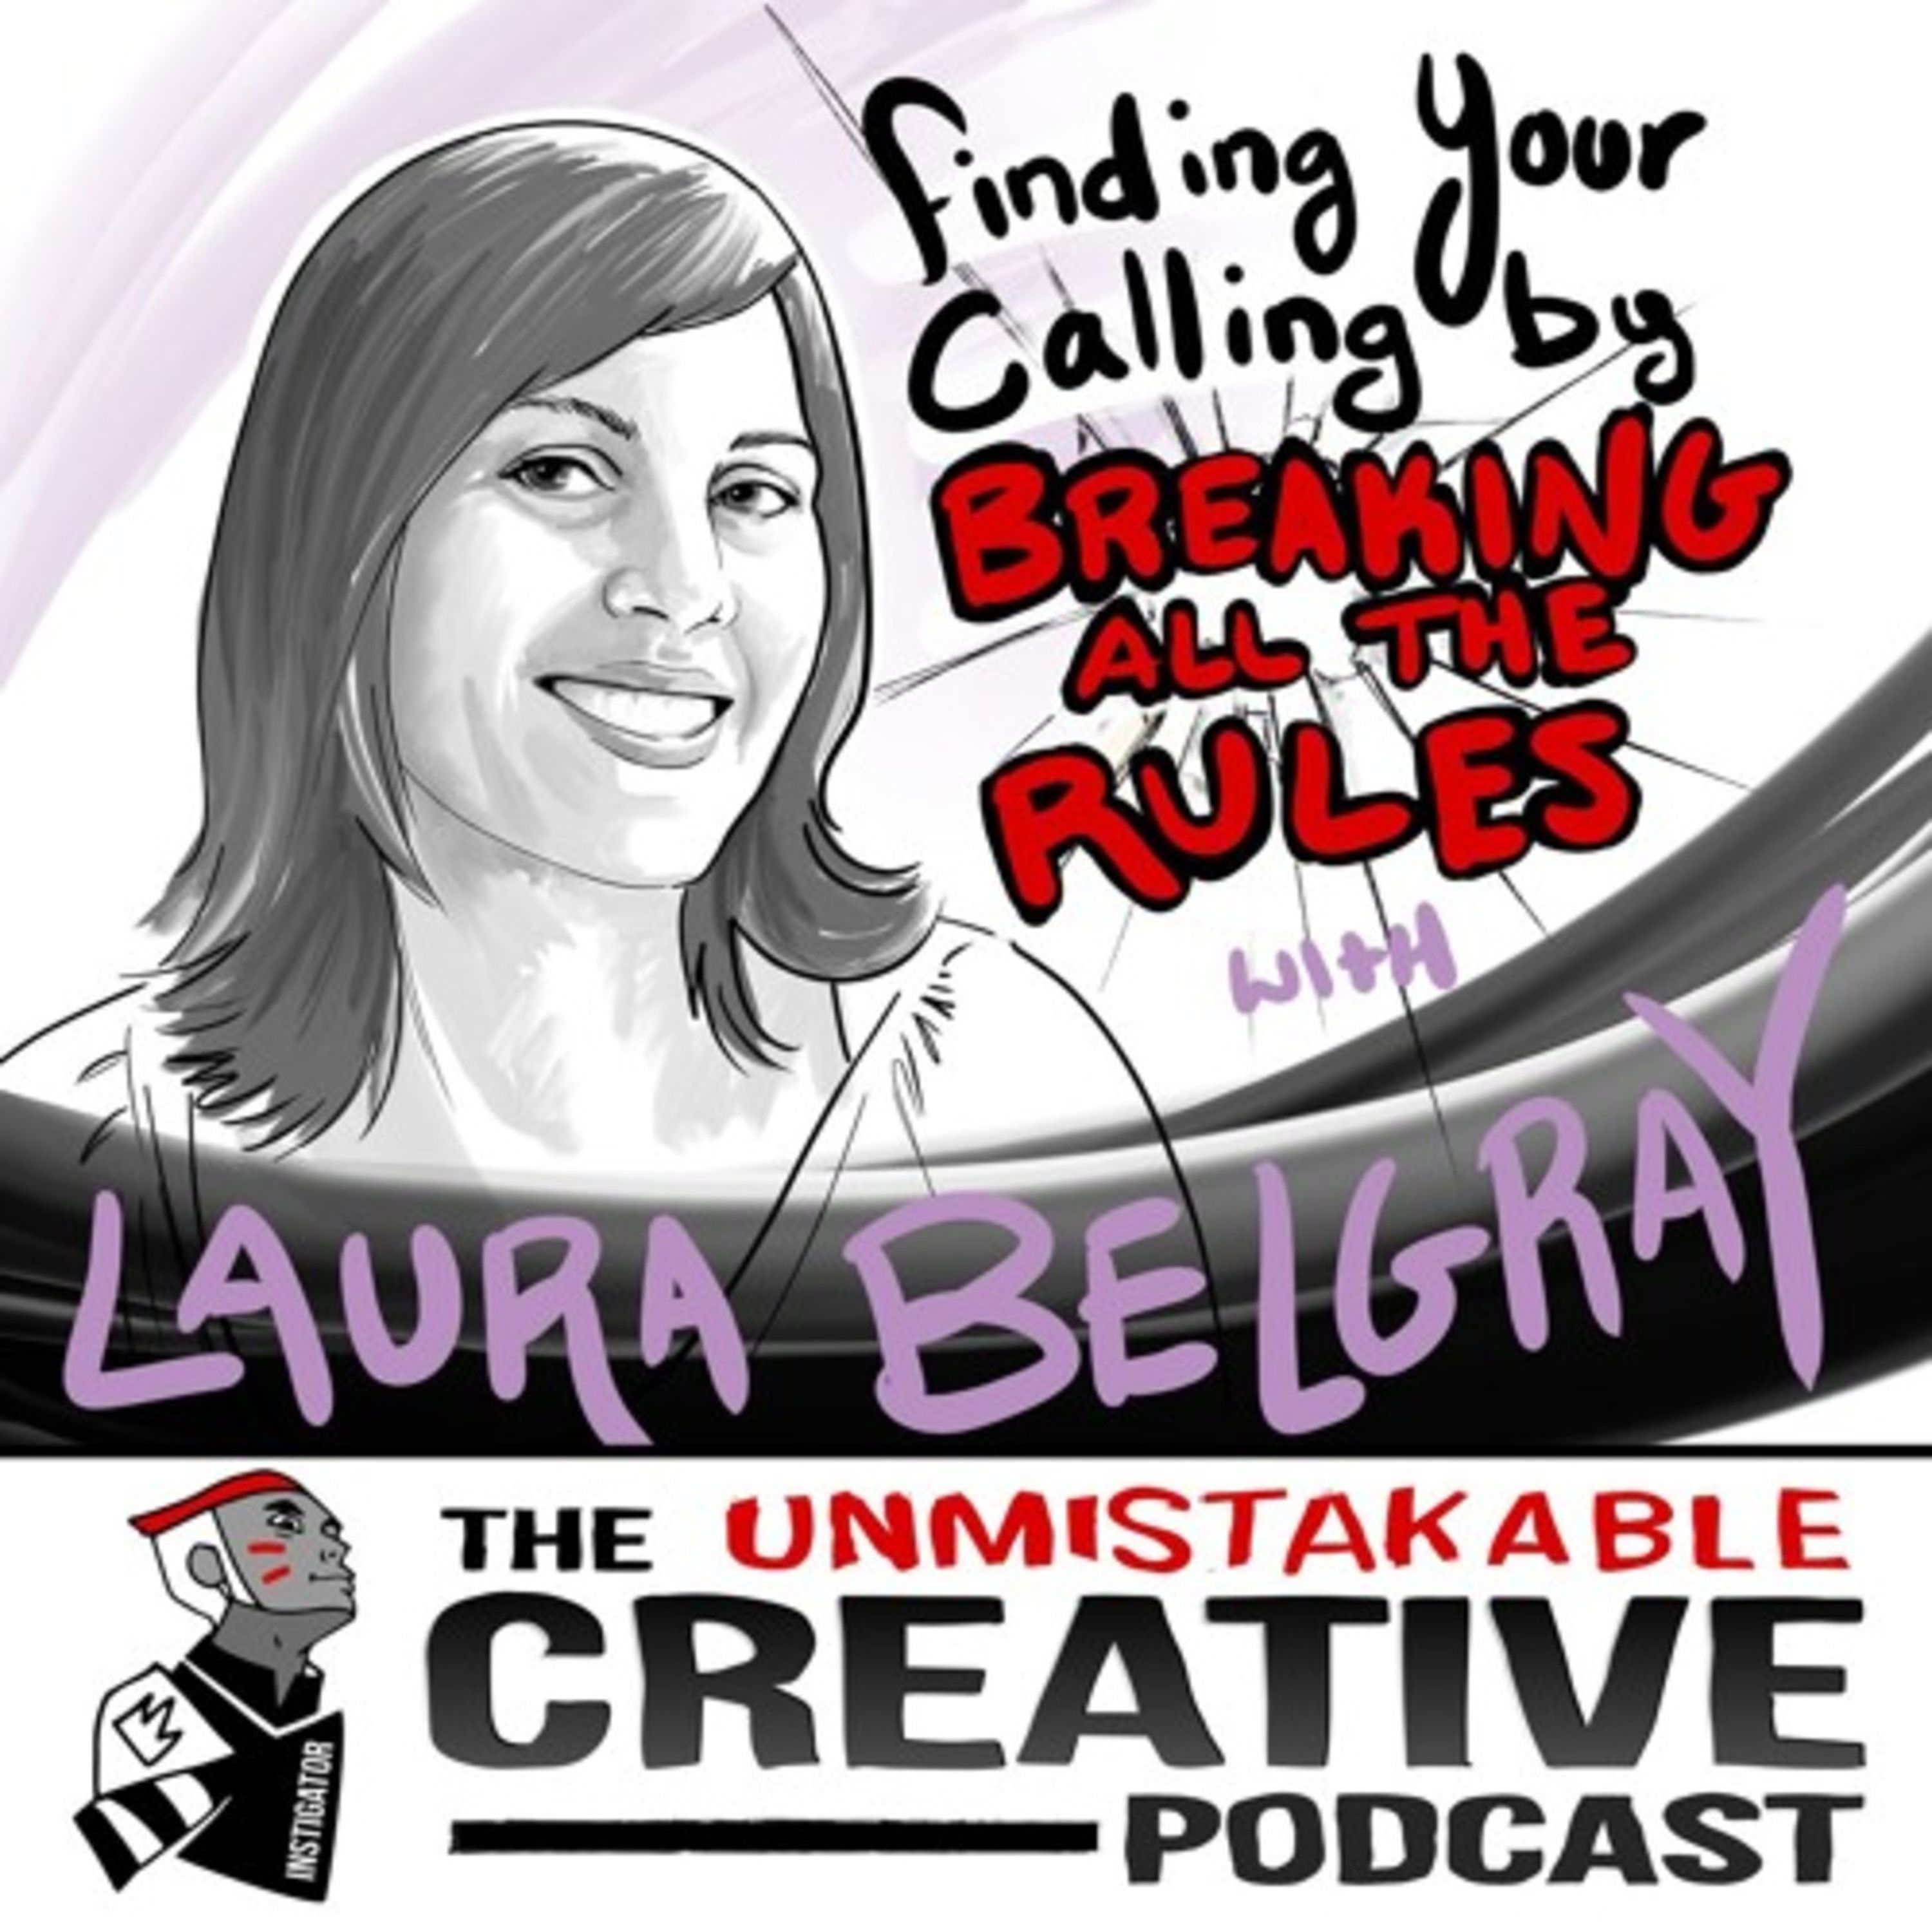 Listener Favorites: Laura Belgray | Finding Your Calling by Breaking All the Rules Image